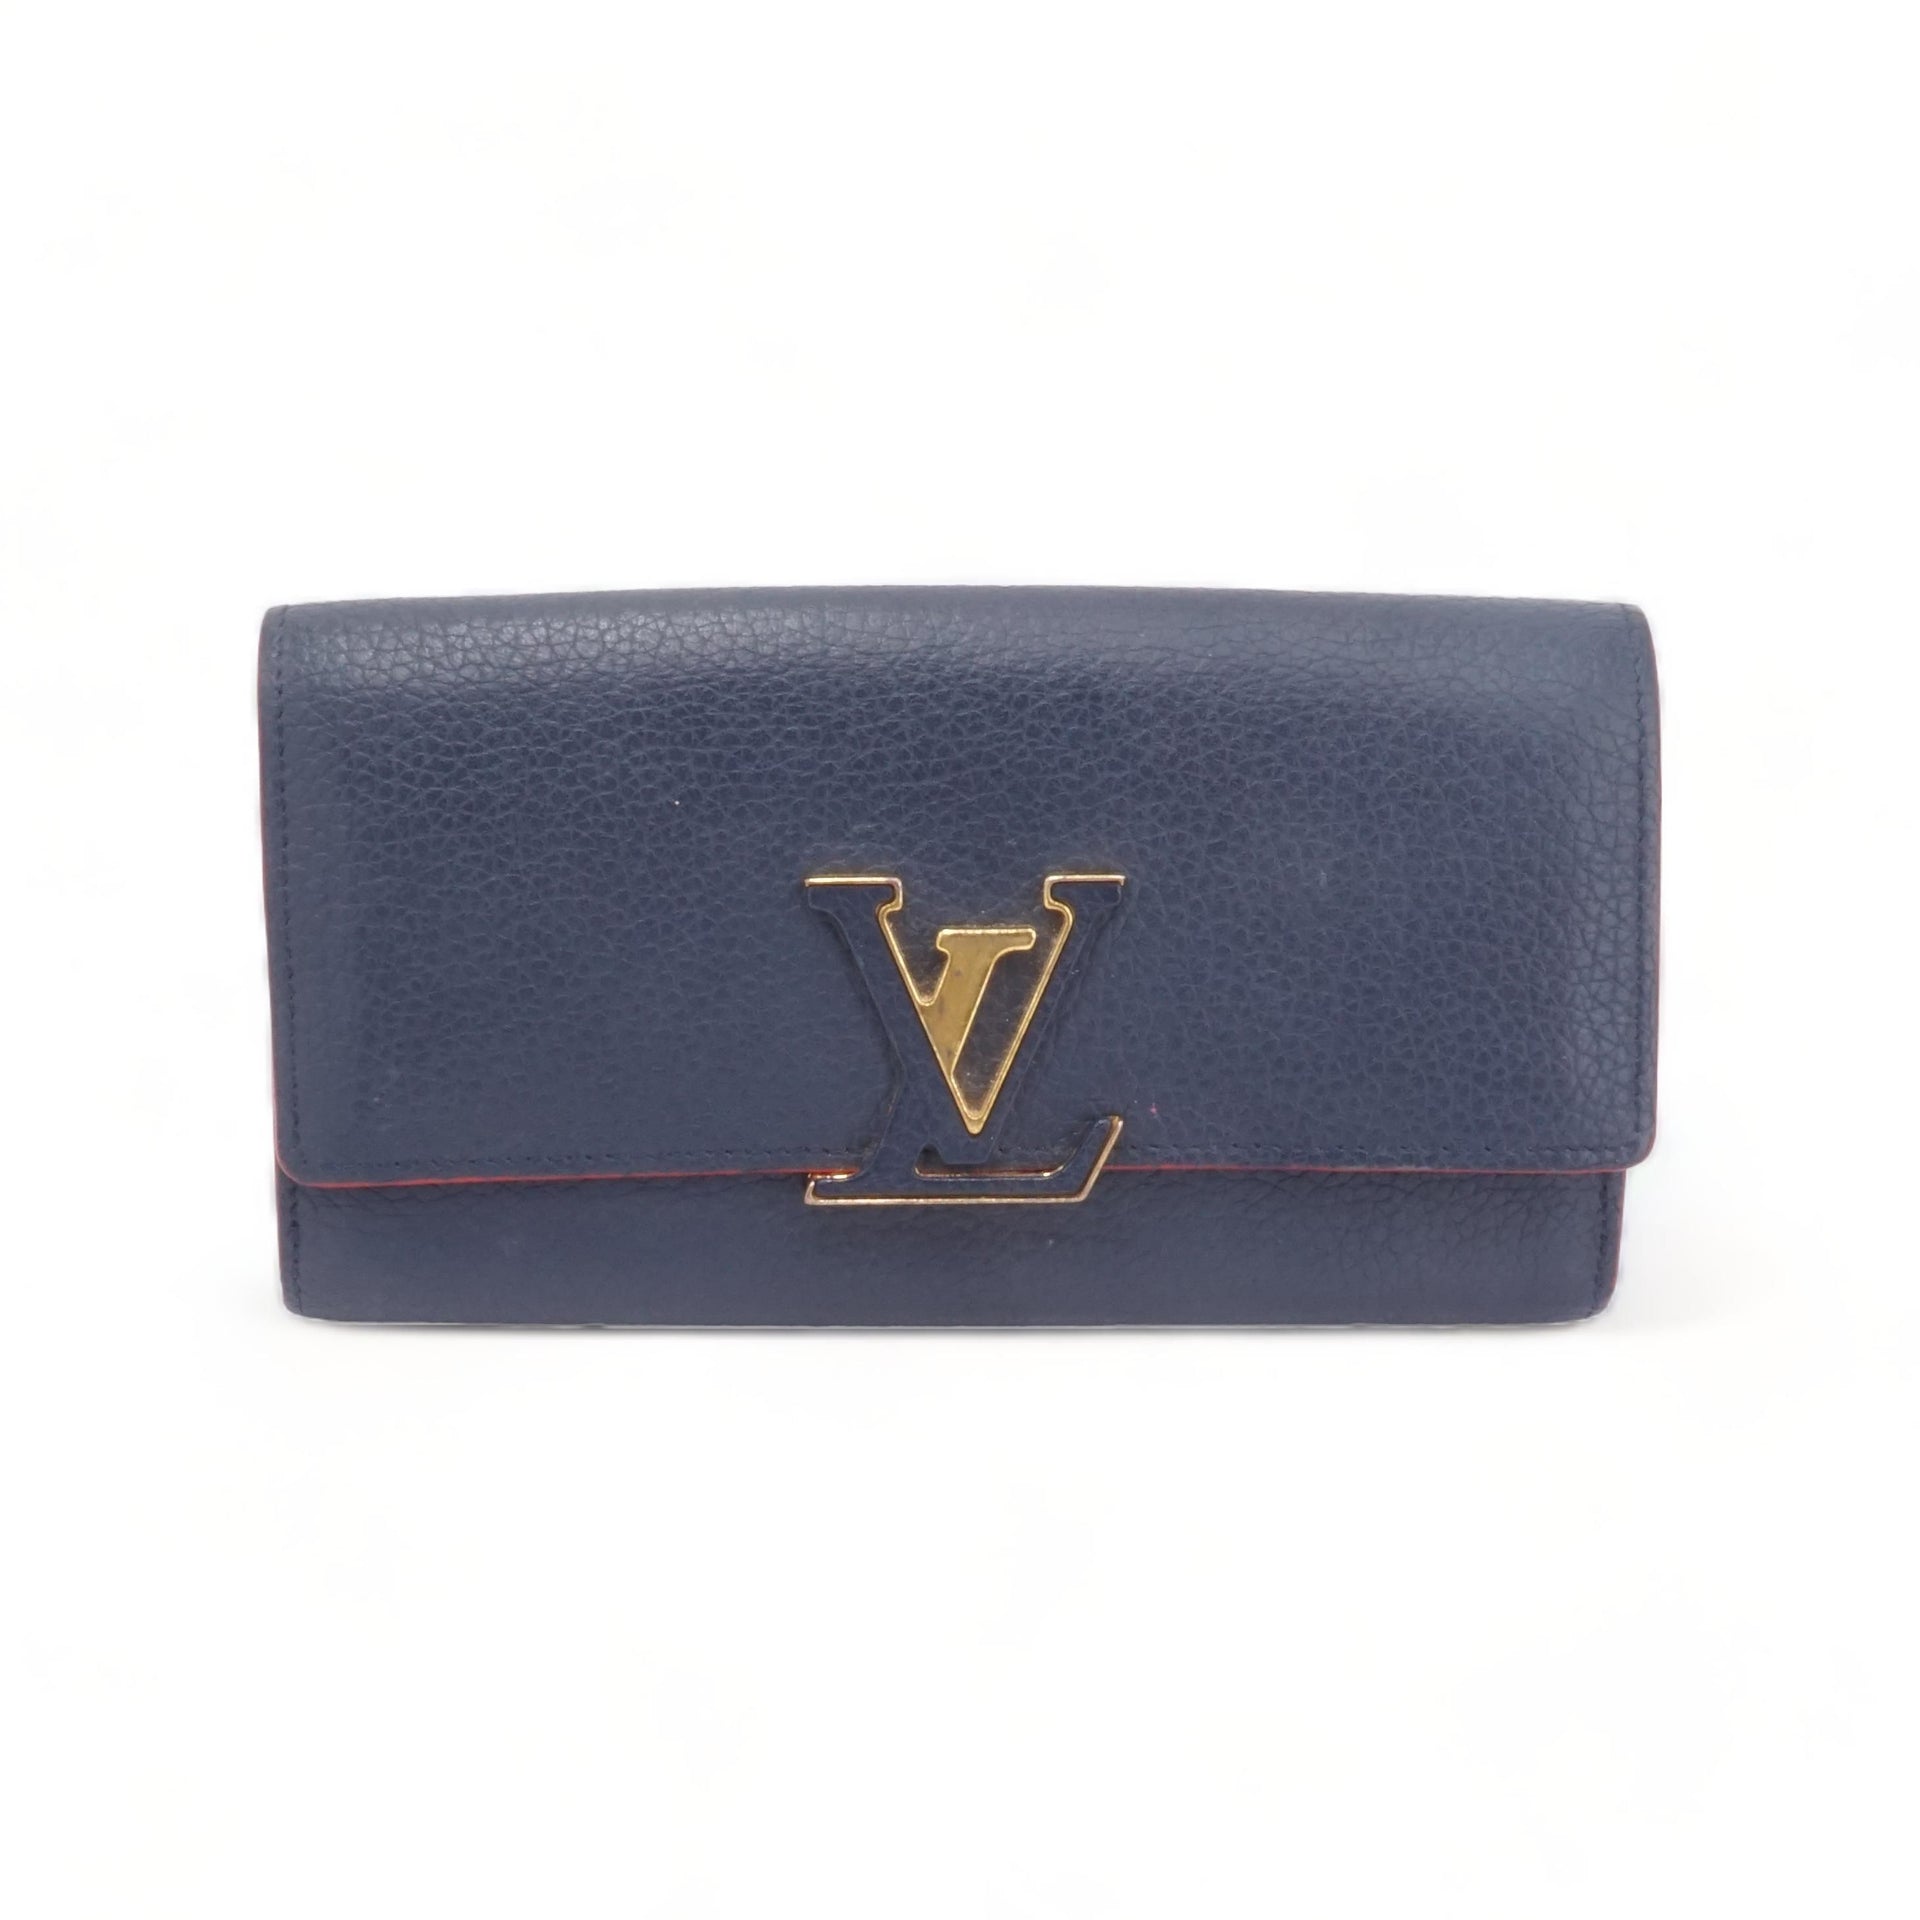 Beautiful Louis Vuitton Capucines wallet with blue and lilac